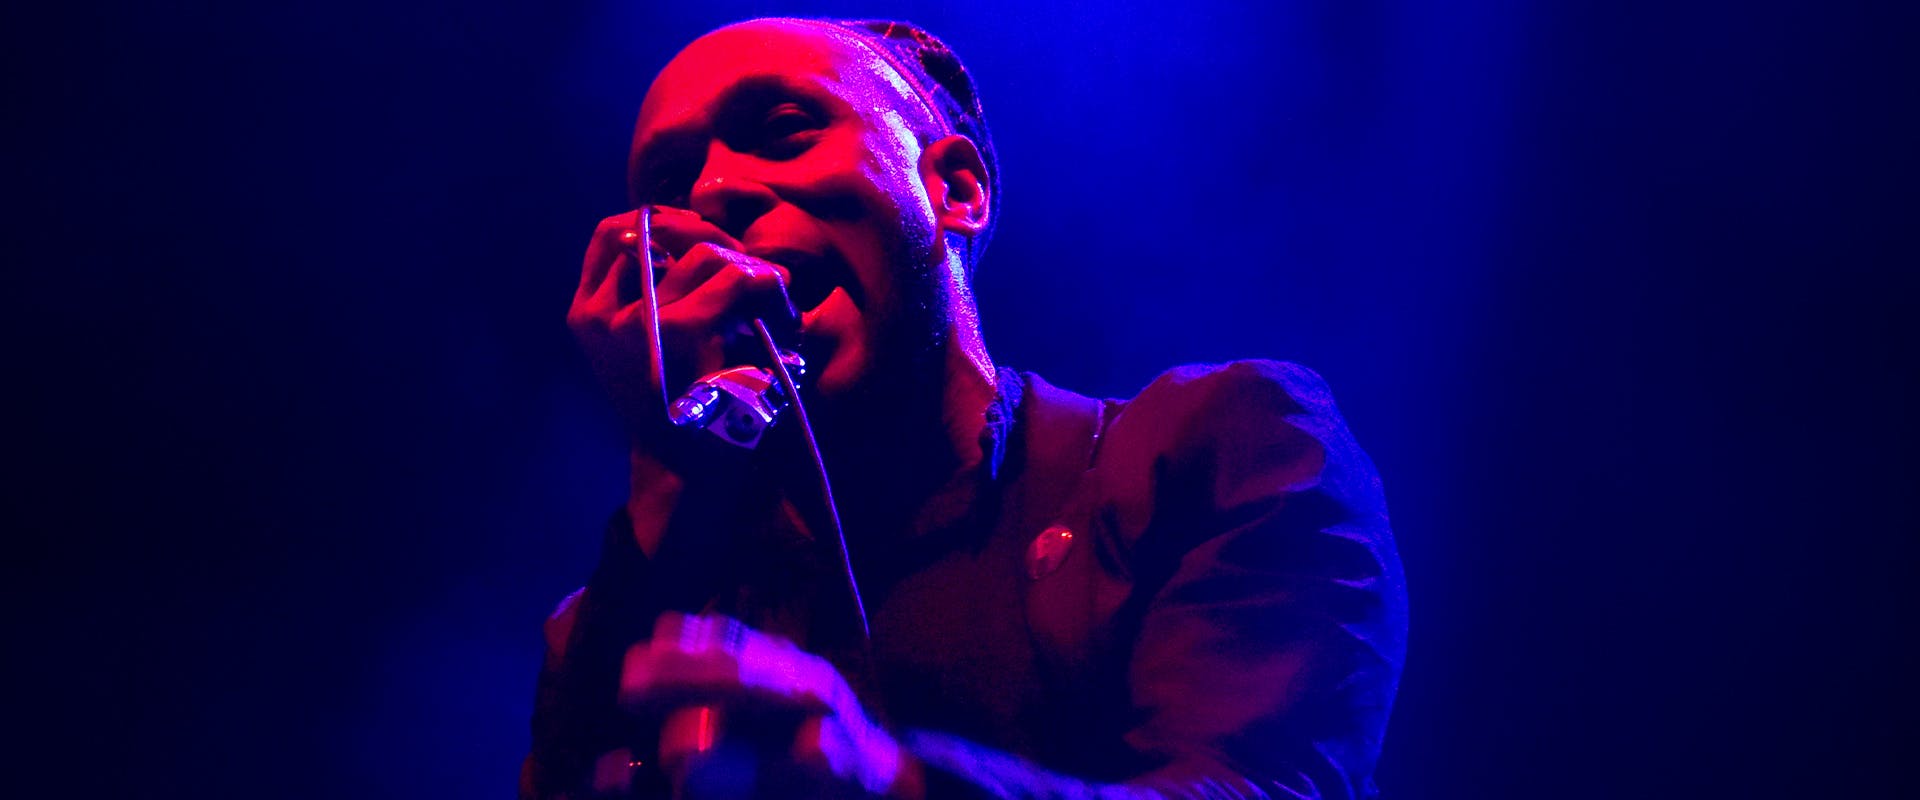 Yasiin Bey To Star In Thelonious Monk Biopic, Estate Says It's Unauthorized